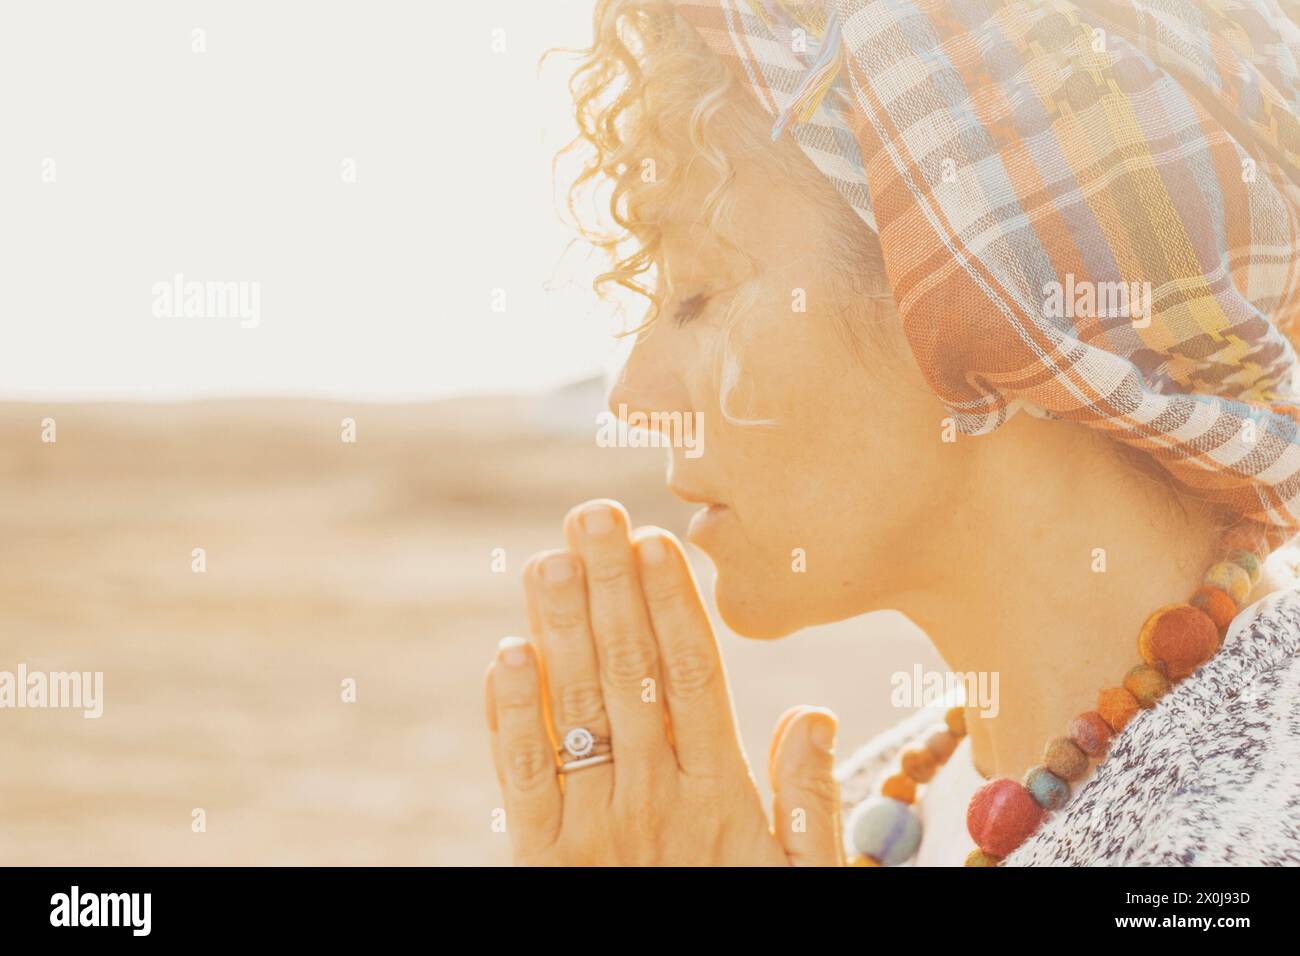 Portrait of woman with joyned hands and closed eyes pray and maditate outdoors with bright sunlight in background. Concept of meditation and inner balance life. Stock Photo